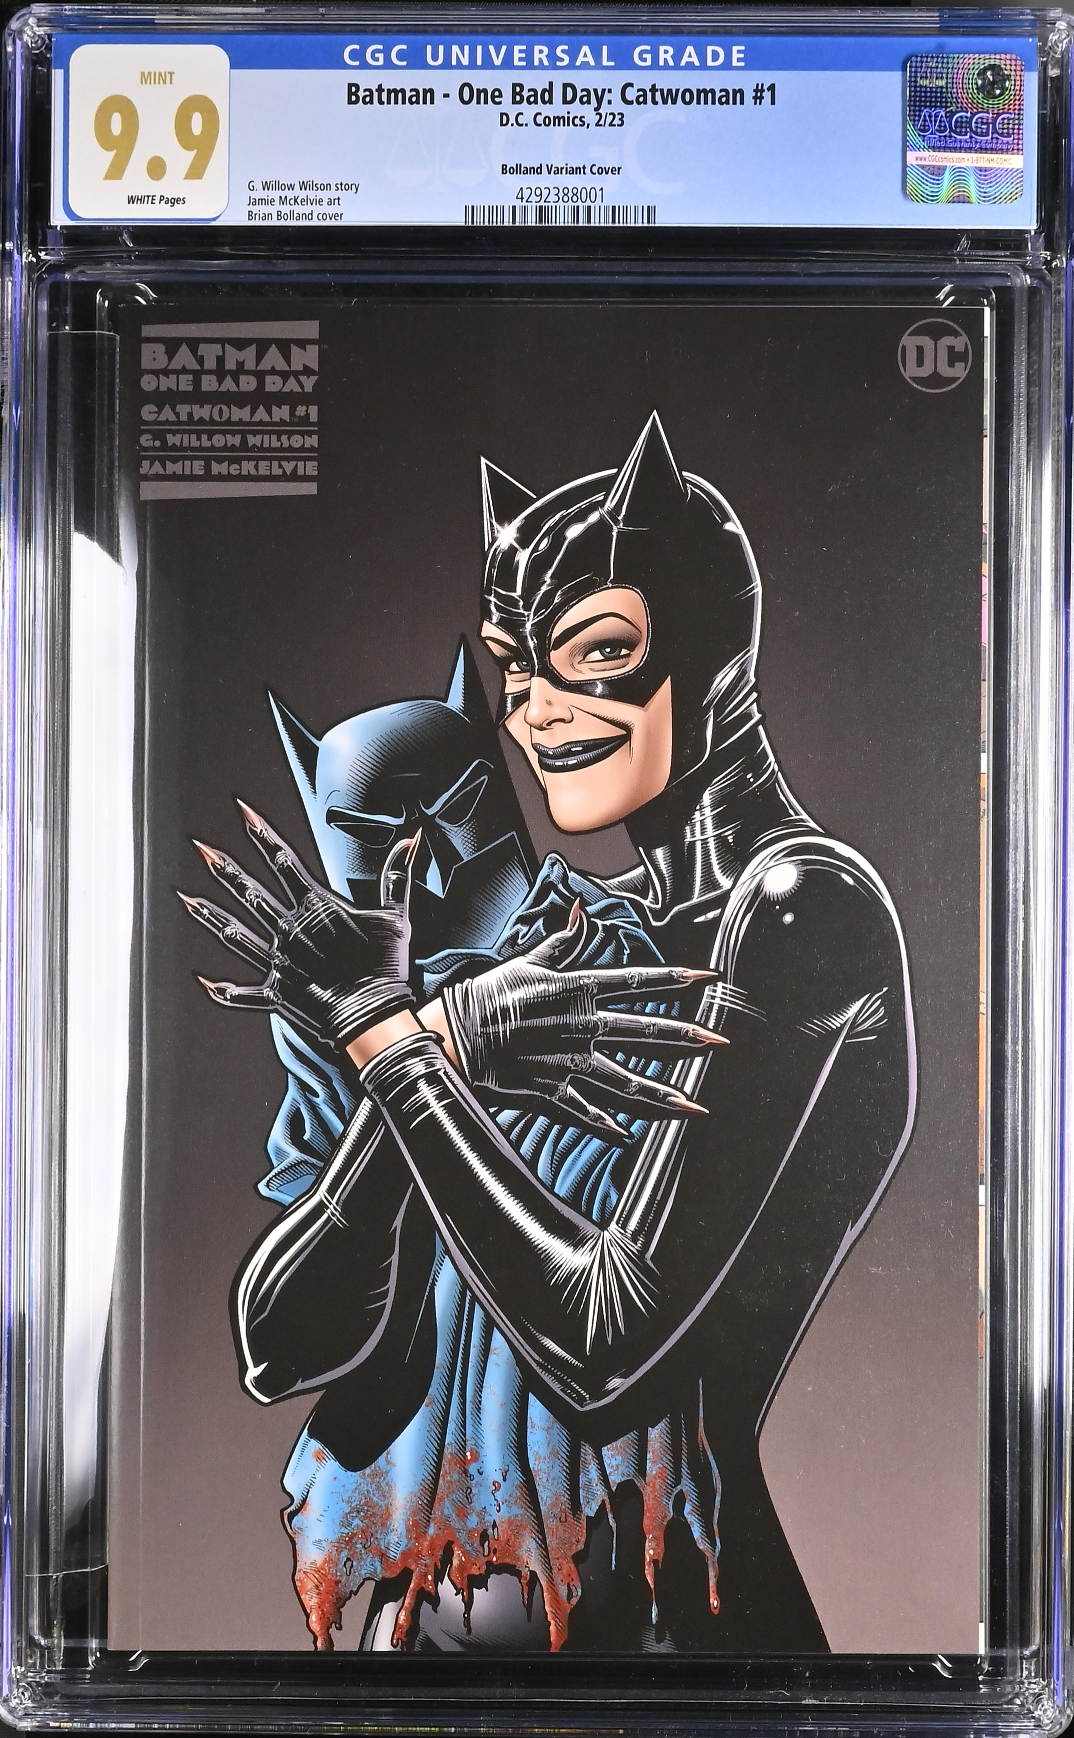 Batman: One Bad Day - Catwoman #1 Bolland 1:100 Retailer Incentive Variant CGC 9.9